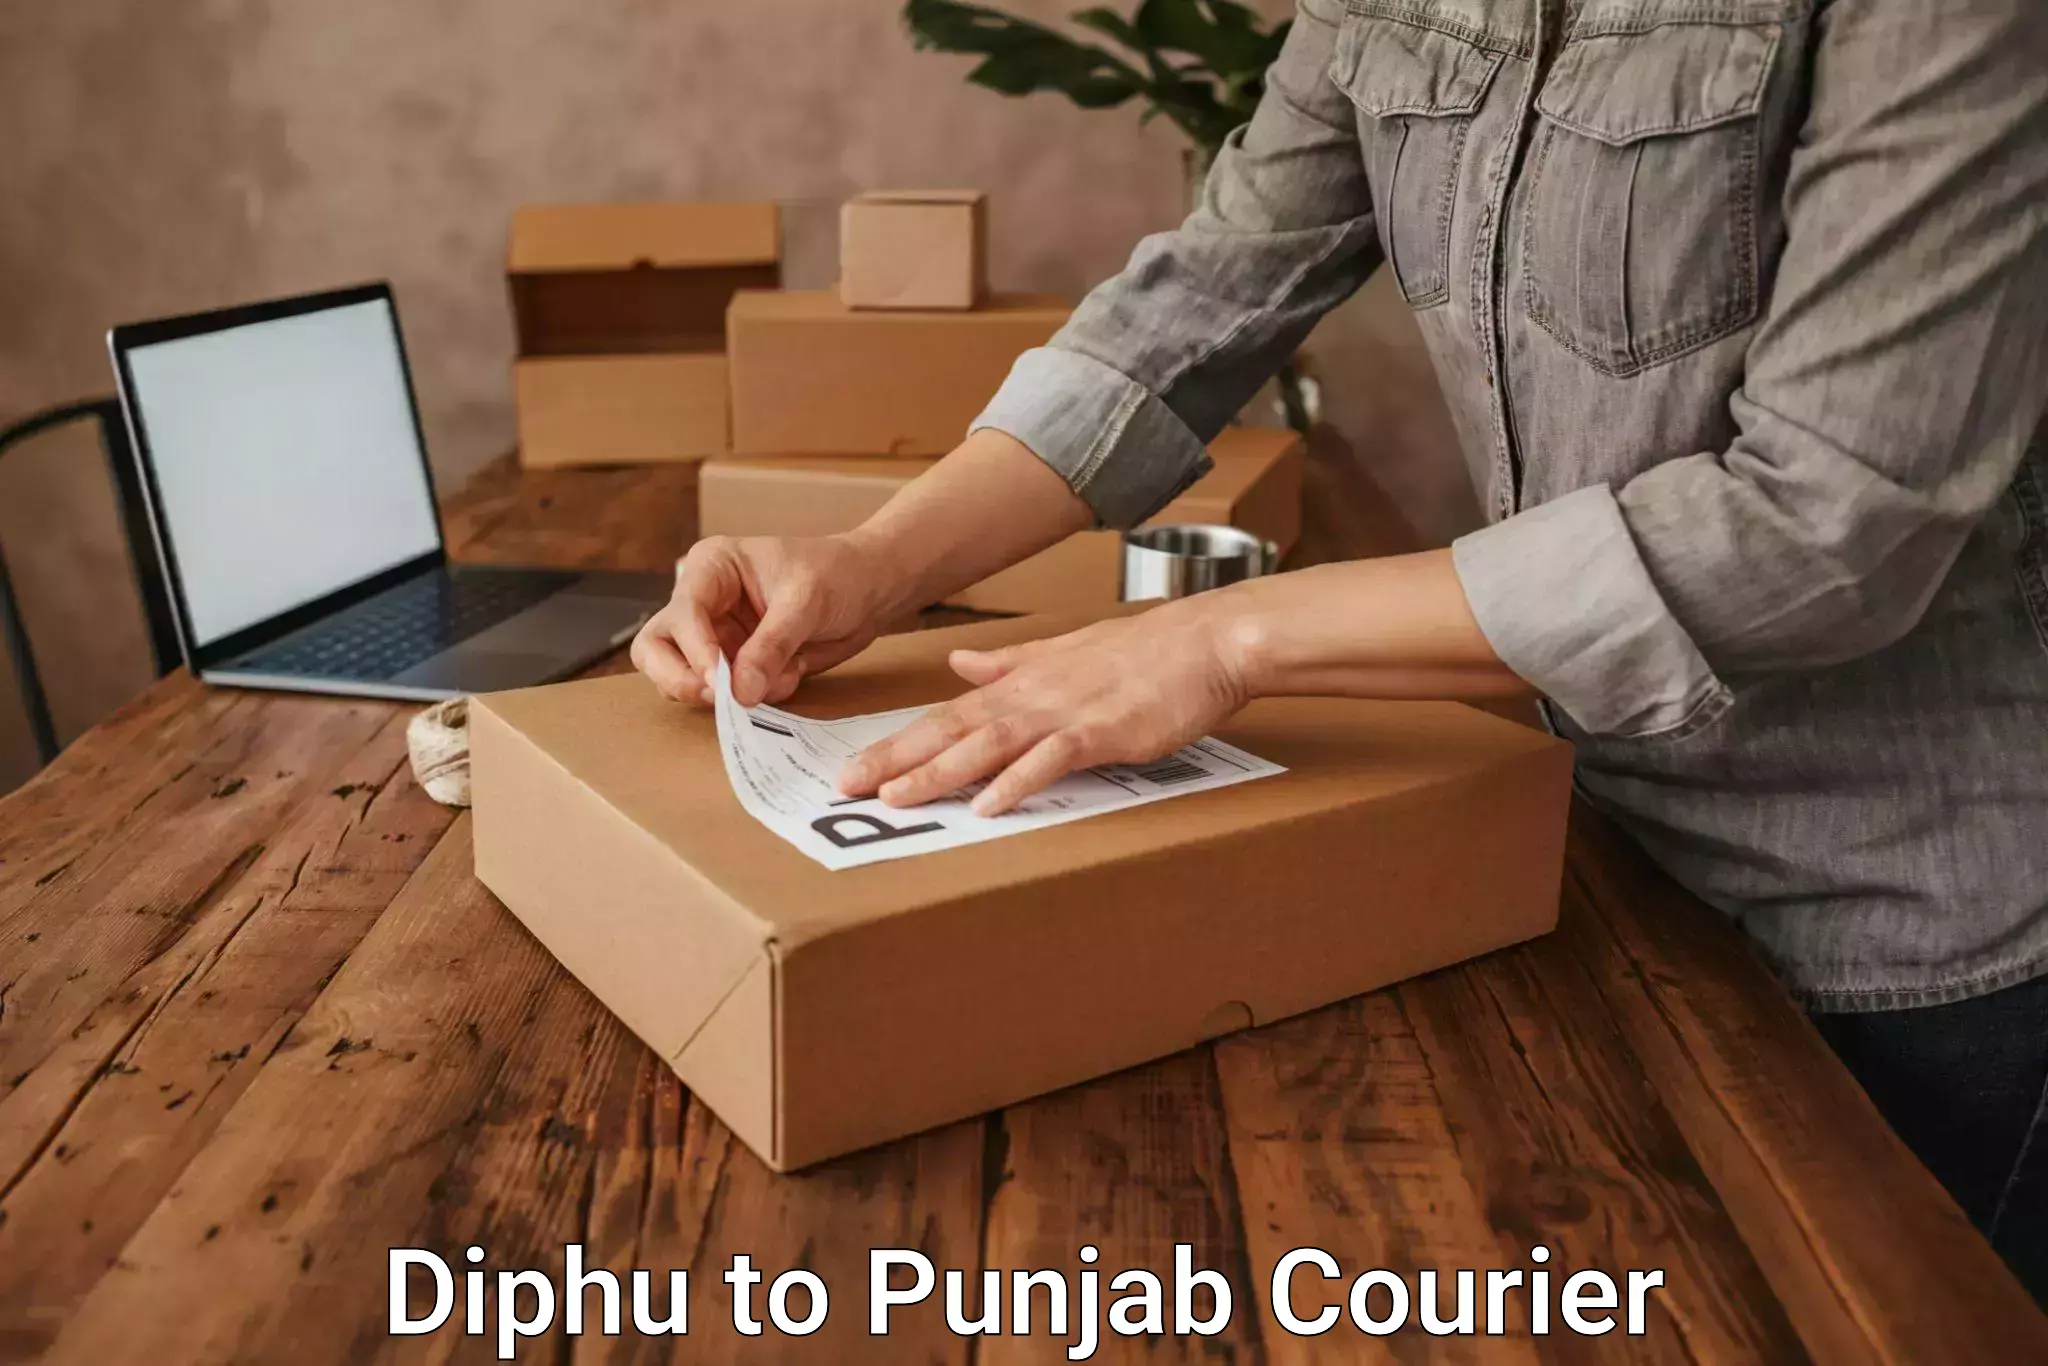 Personal courier services Diphu to Punjab